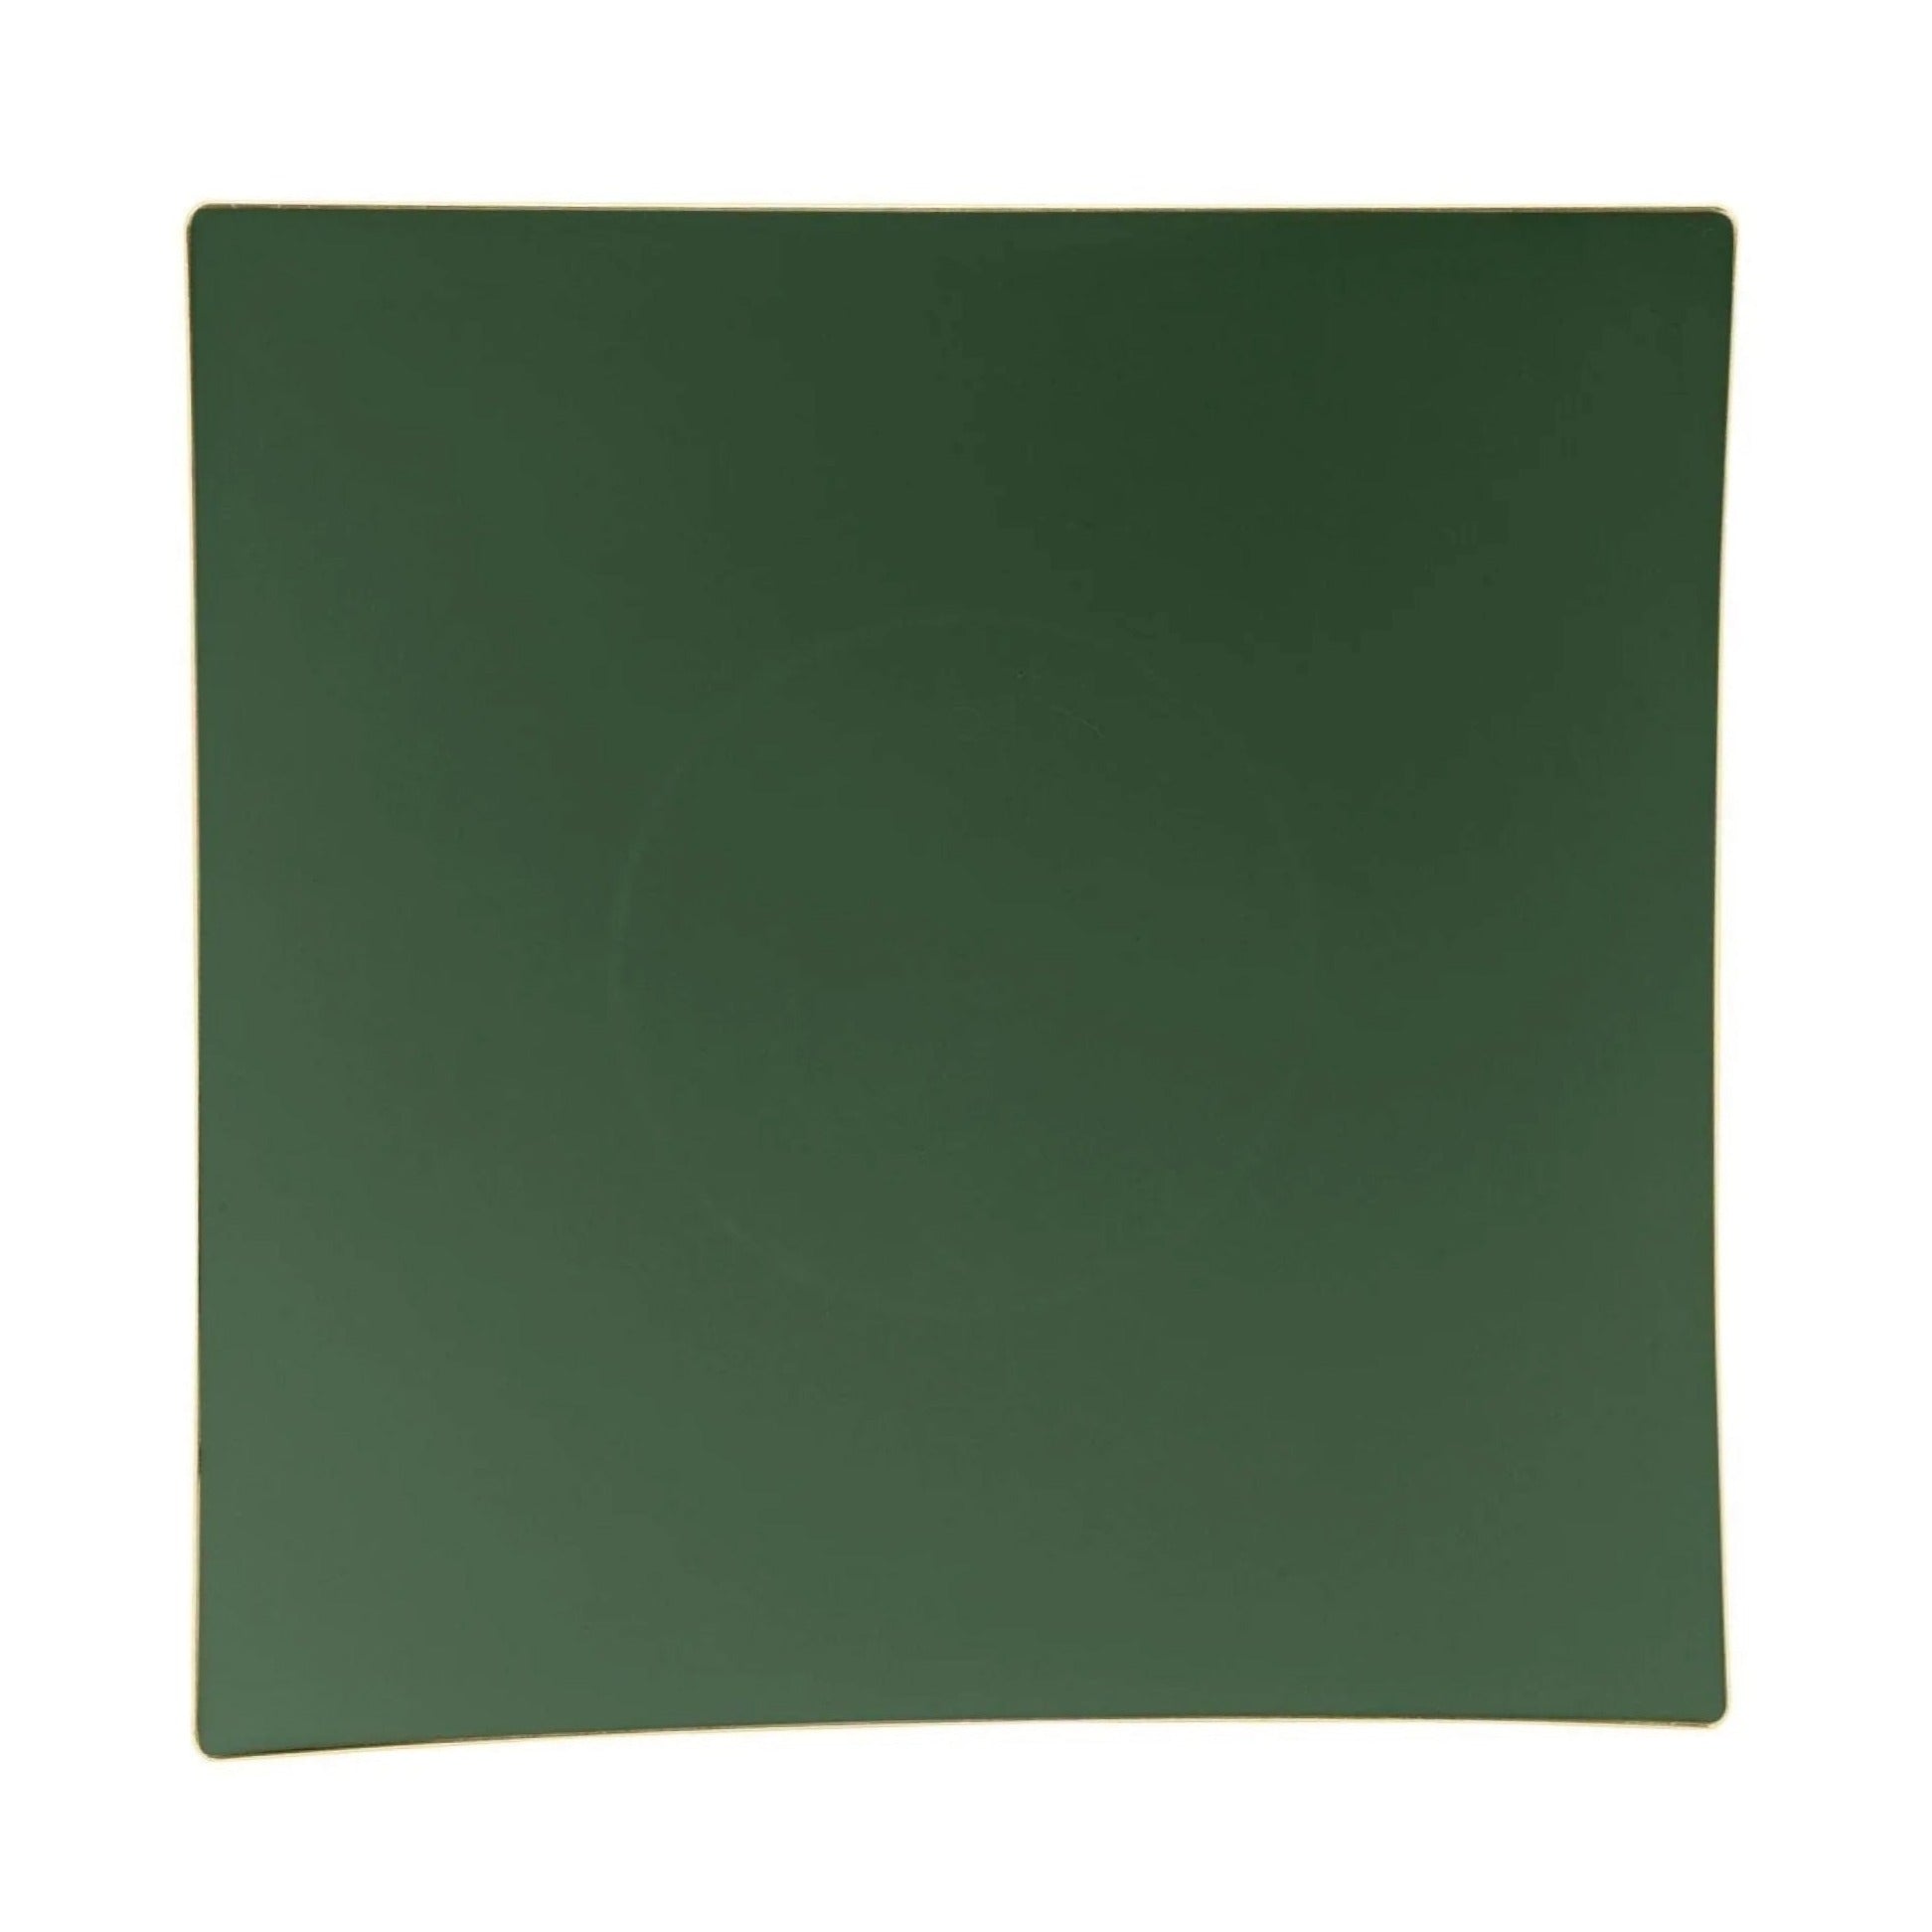 Emerald & Gold Rim Square Plastic Lunch Plates 10ct | The Party Darling